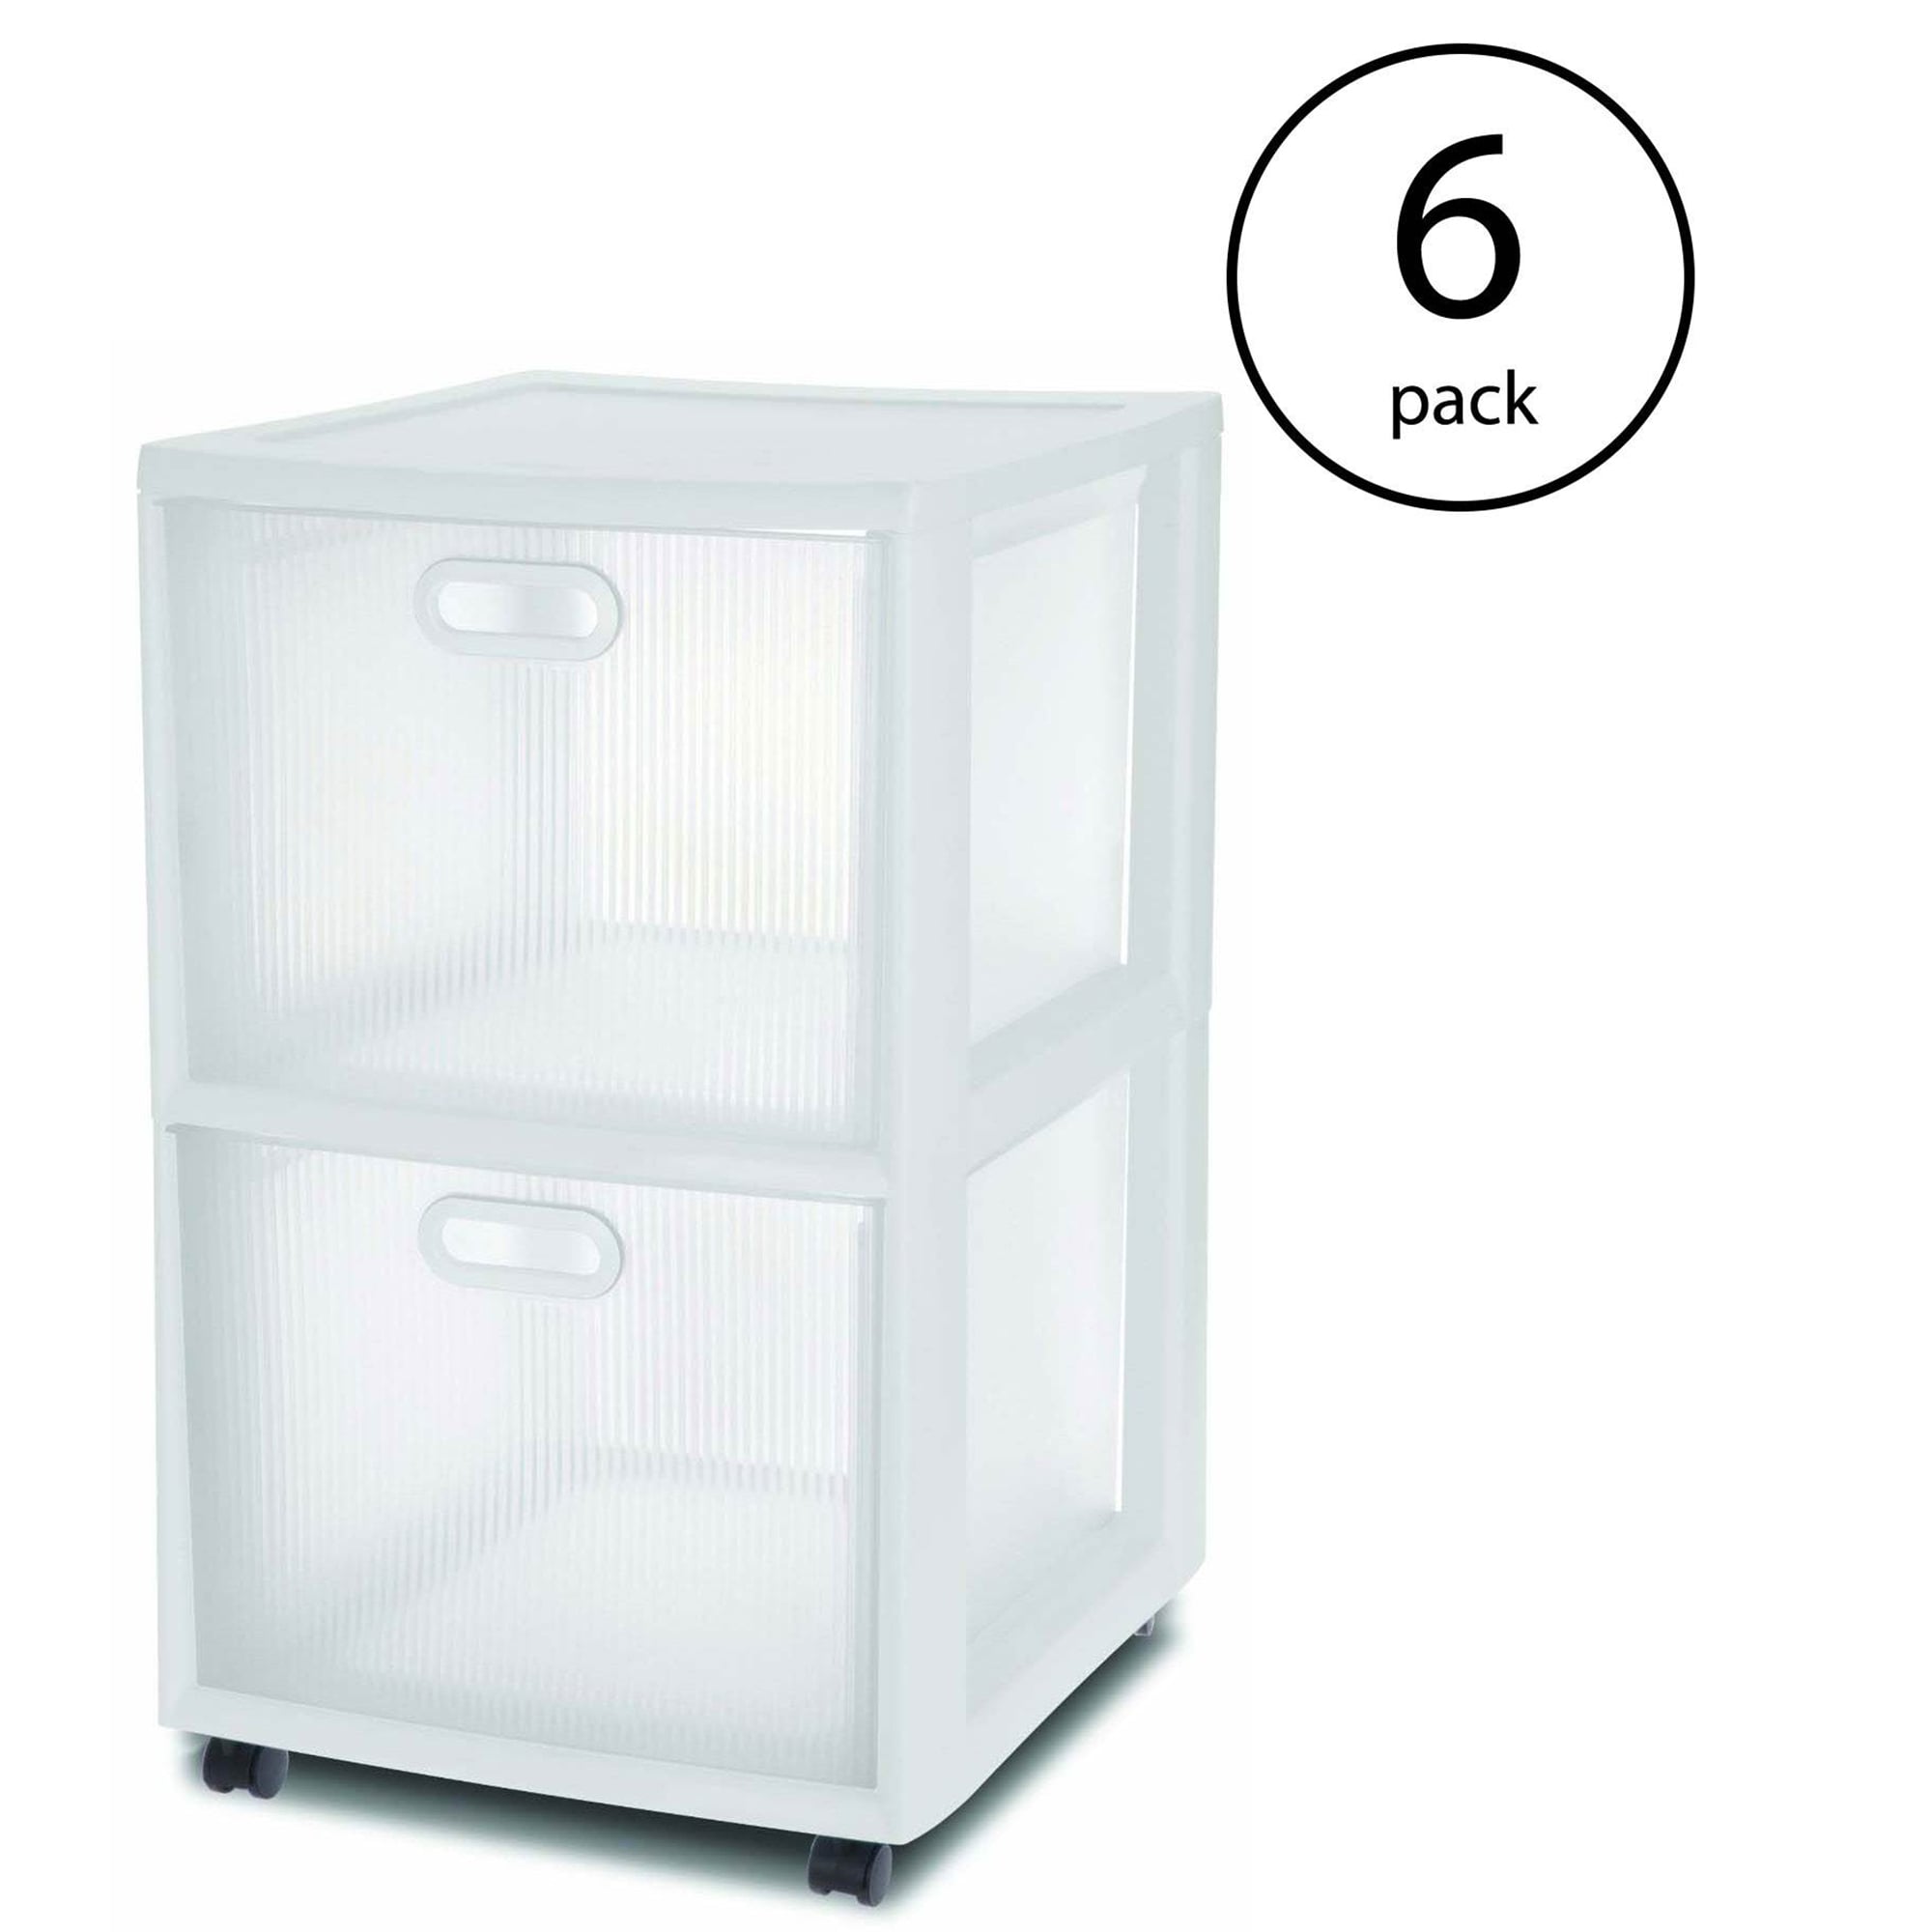 Sterilite 6 Pack White Rolling Storage Drawer Cart 26 25 In H X 16 W 18 D The Drawers Department At Lowes Com